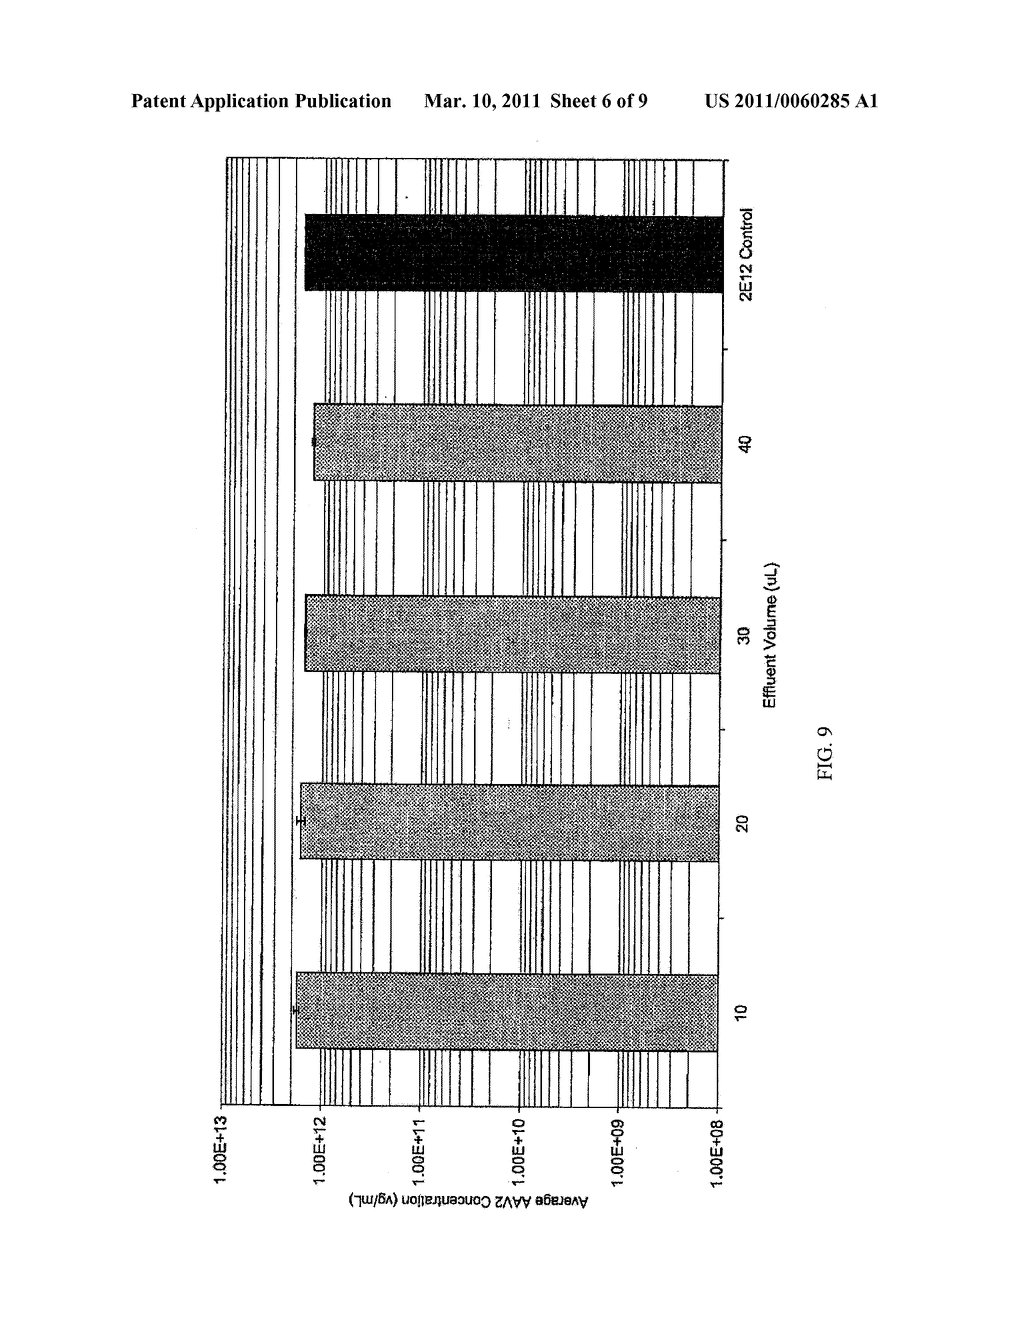 Needle Assembly for Use in Delivering Precise Dosages of Proteinaceous Pharmaceutical Compositions and Methods for Use of Same - diagram, schematic, and image 07